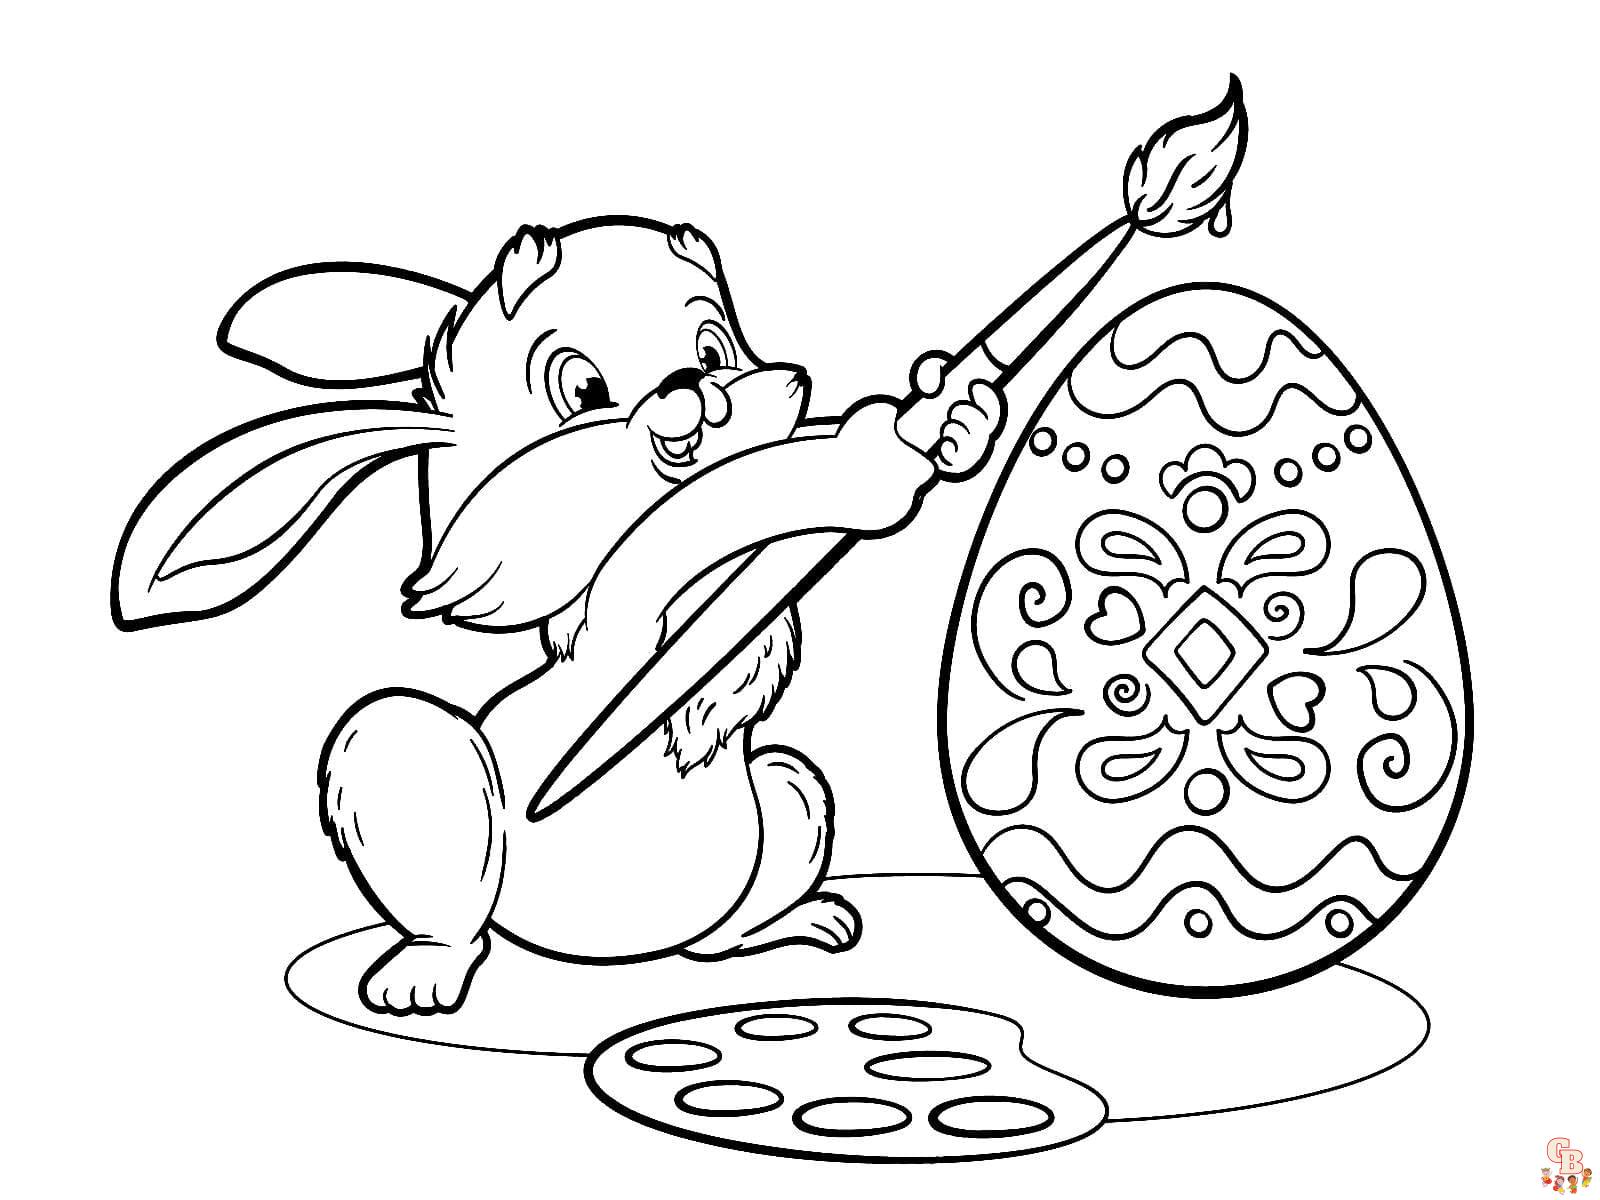 Coloring Rabbit Cartoon, Easter, realistic, jumping, cute, with flowers